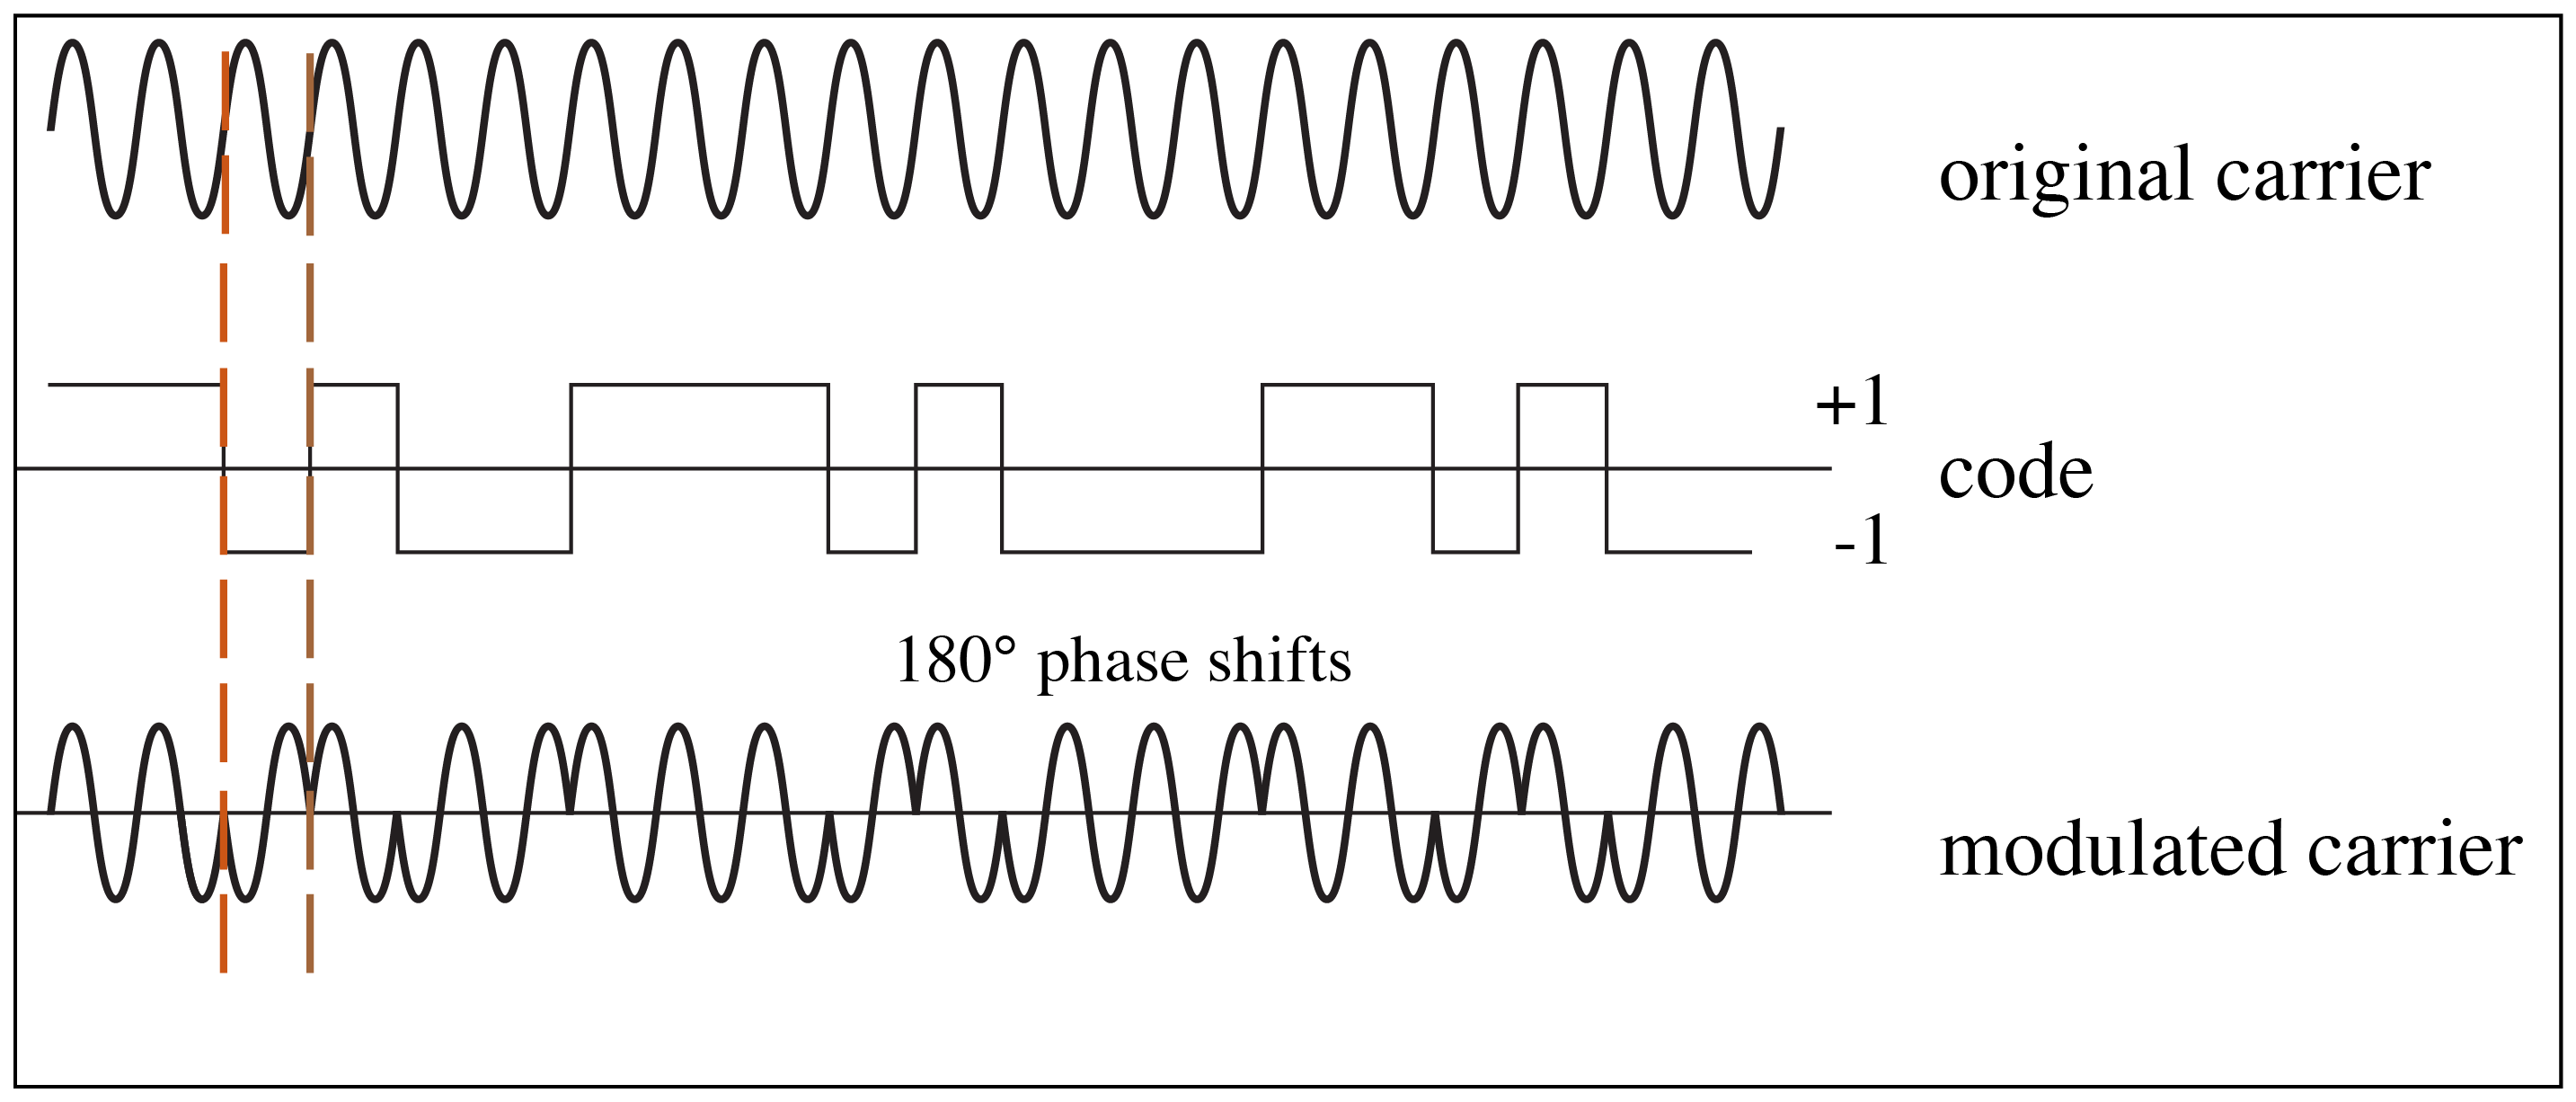 Diagram of Carrier wave modulation with the code